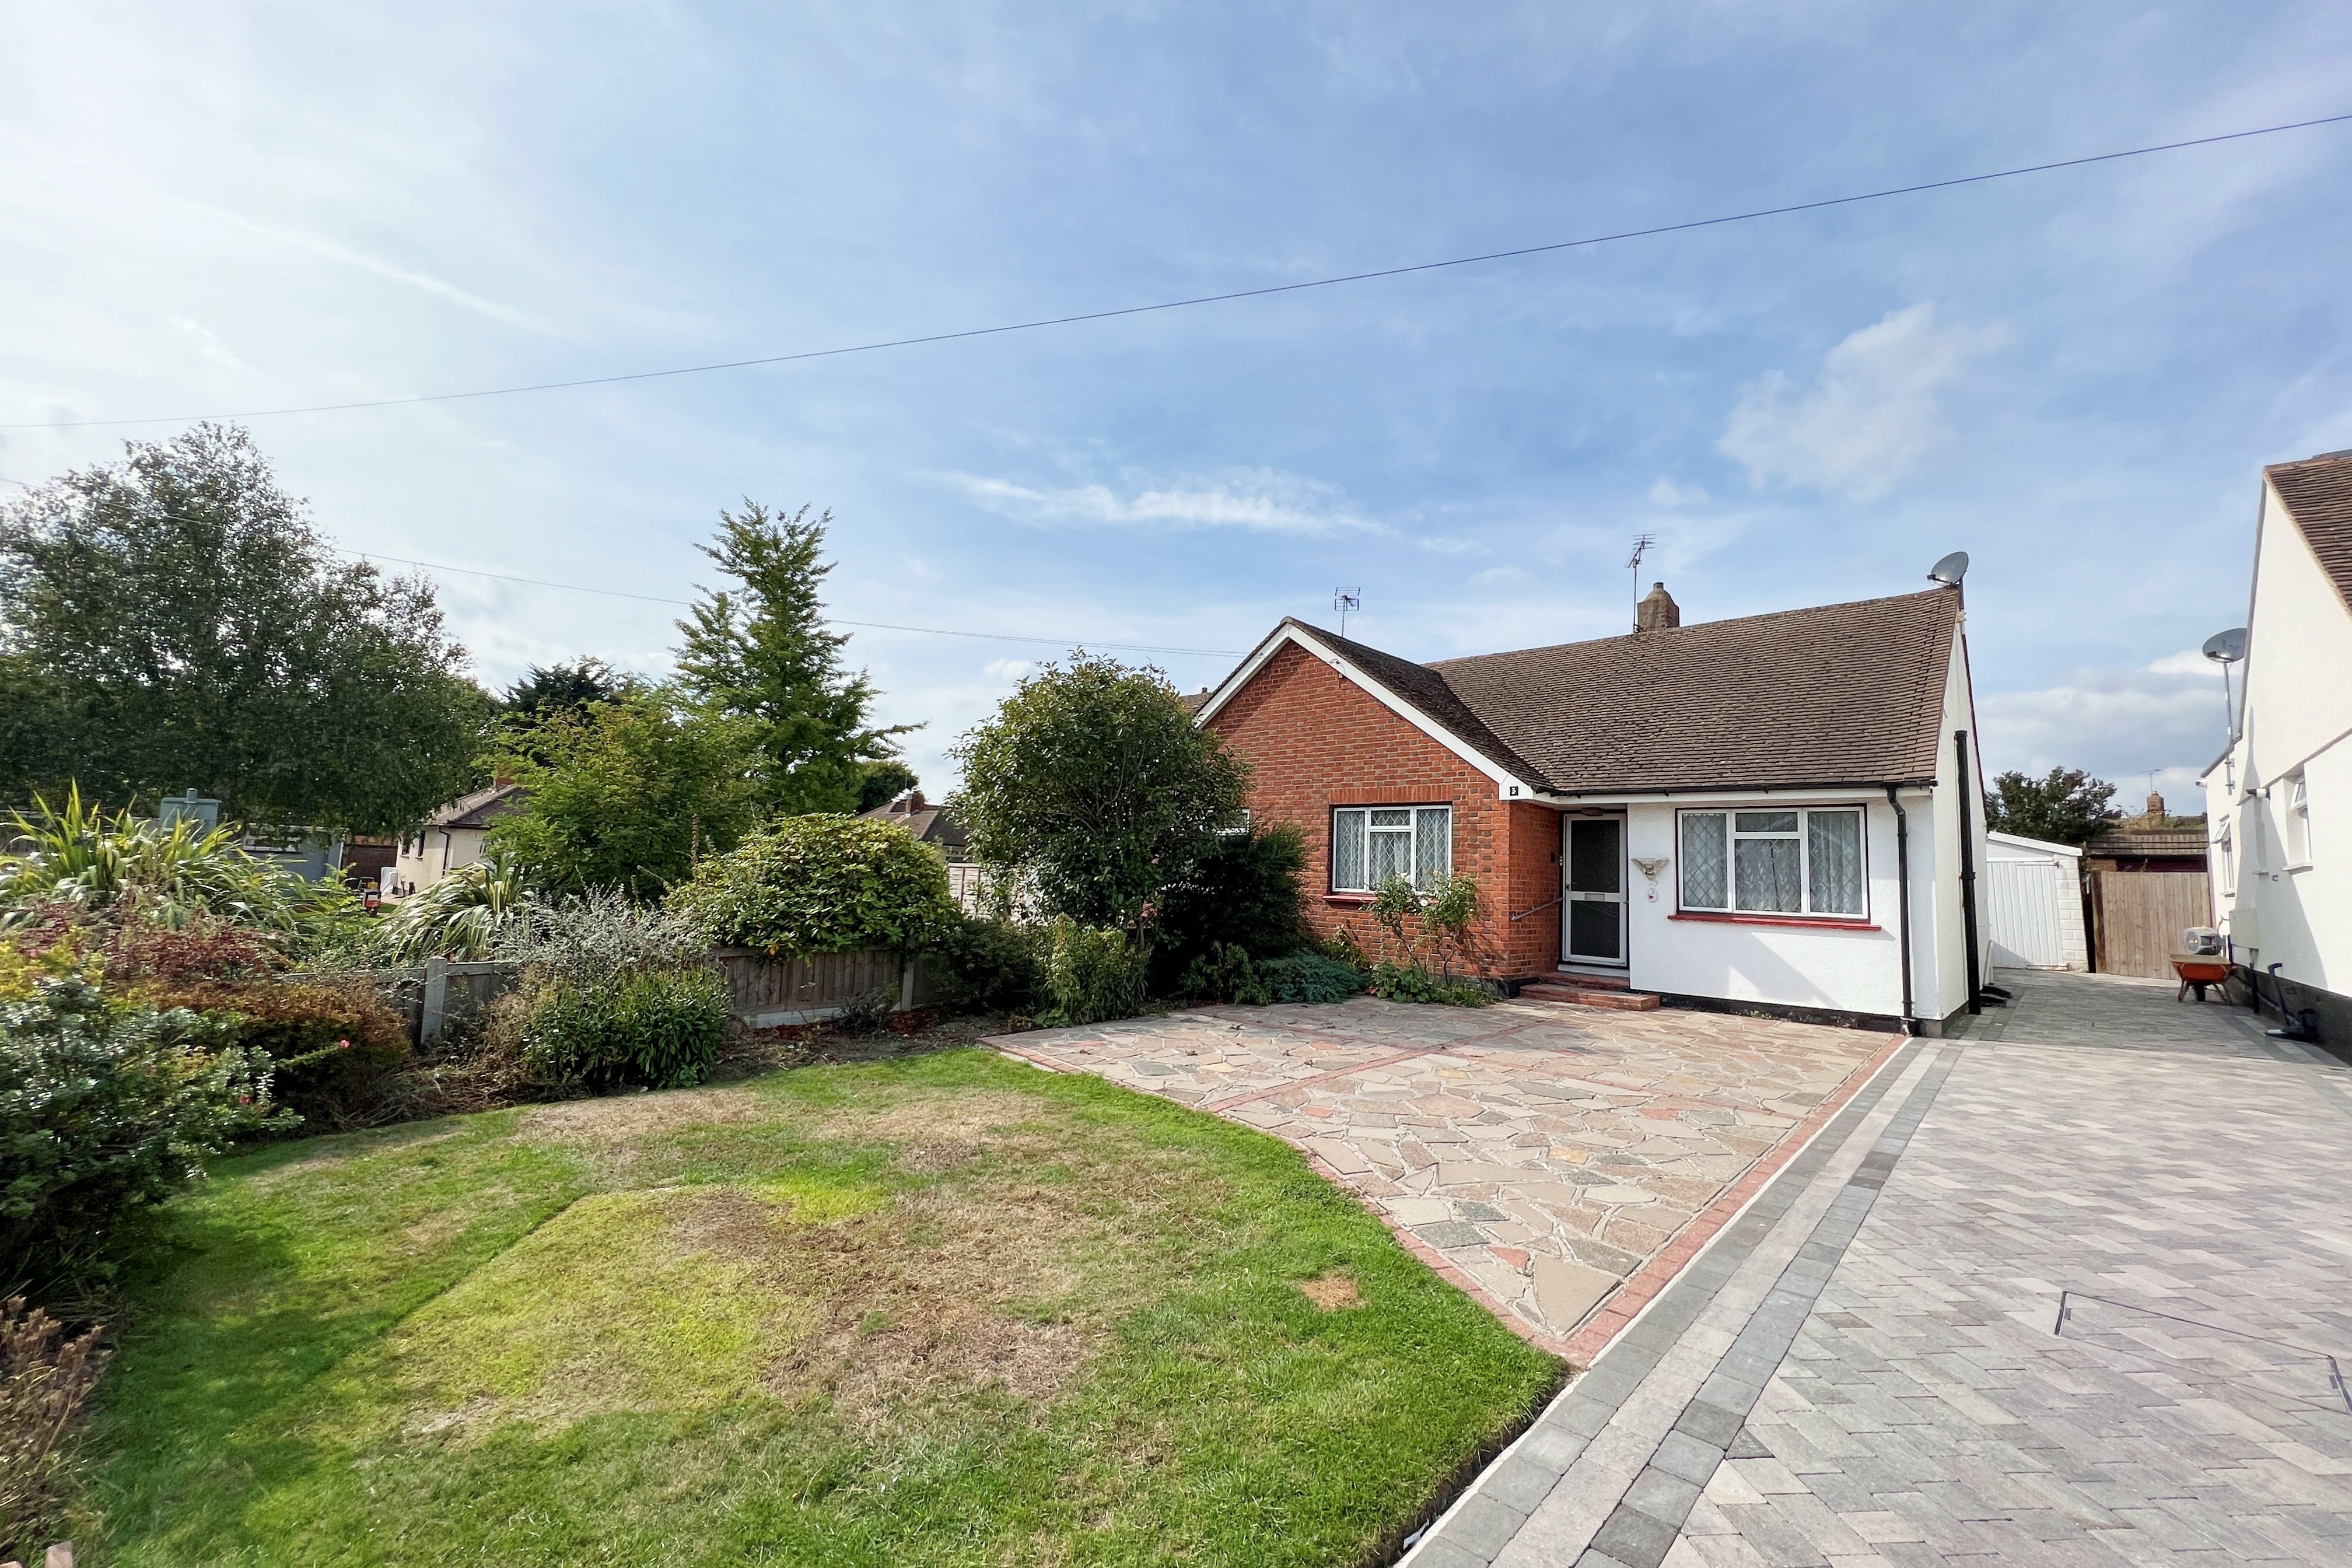 2 bed semi-detached bungalow for sale in Sayers, Thundersley, SS7 